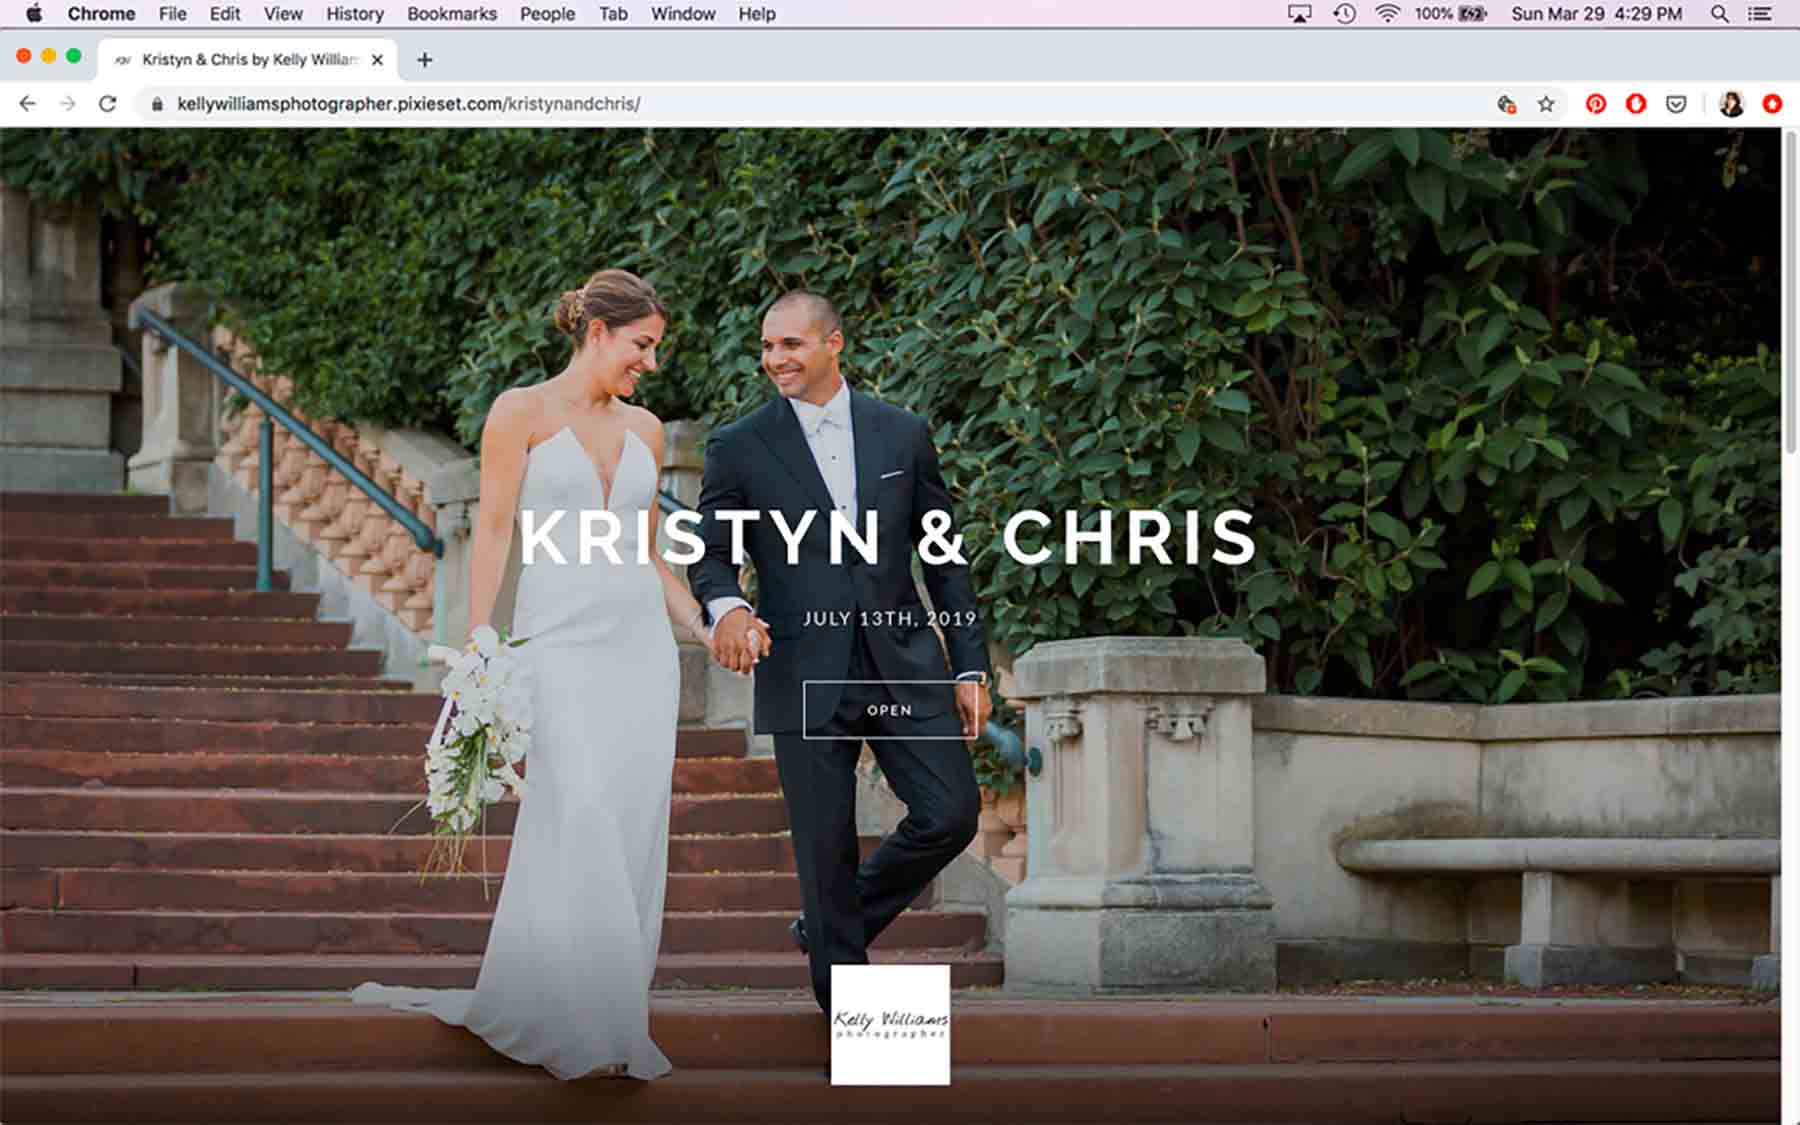 Screenshots of client online photo gallery for an article on how to use your online photo gallery